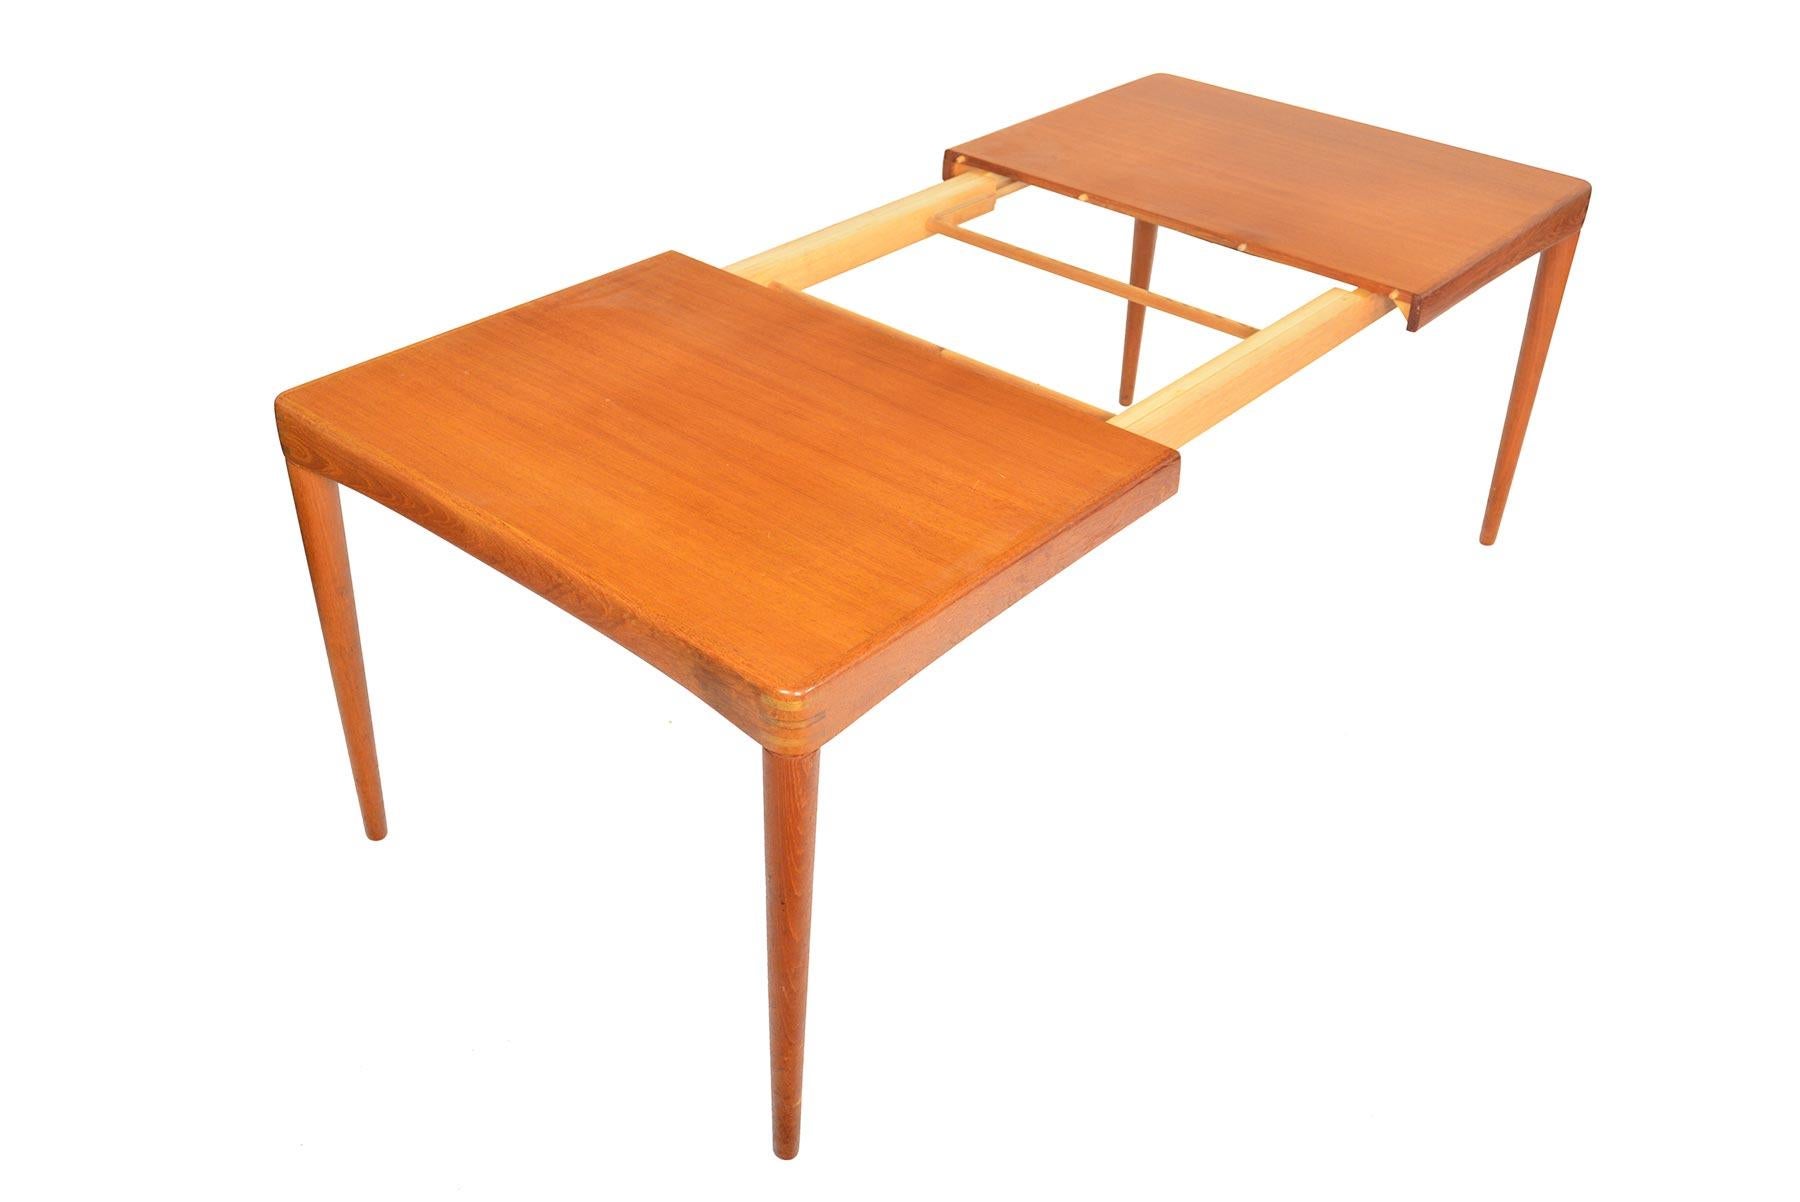 20th Century H.W. Klein Teak and Rosewood Danish Modern Midcentury Dining Table for Bramin